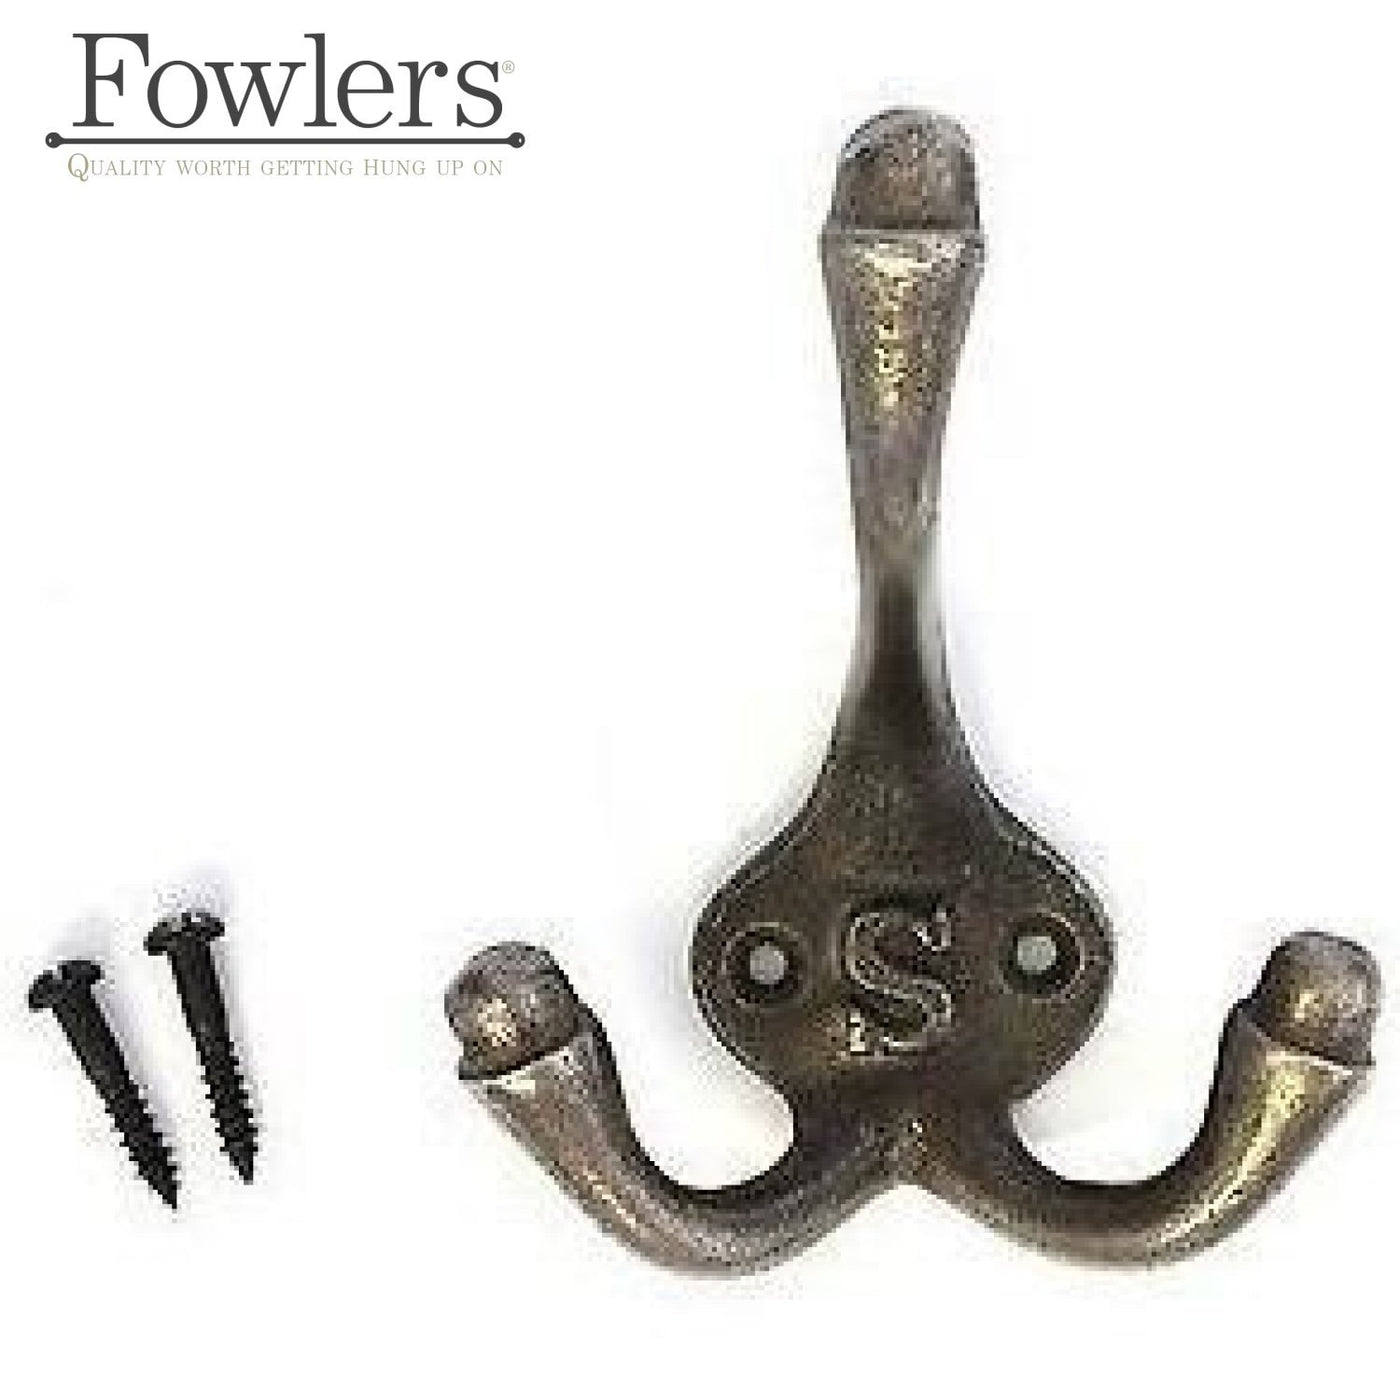 Cast Iron coat hook - TRIPLE STYLE - Natural polished finish. – FOWLERS